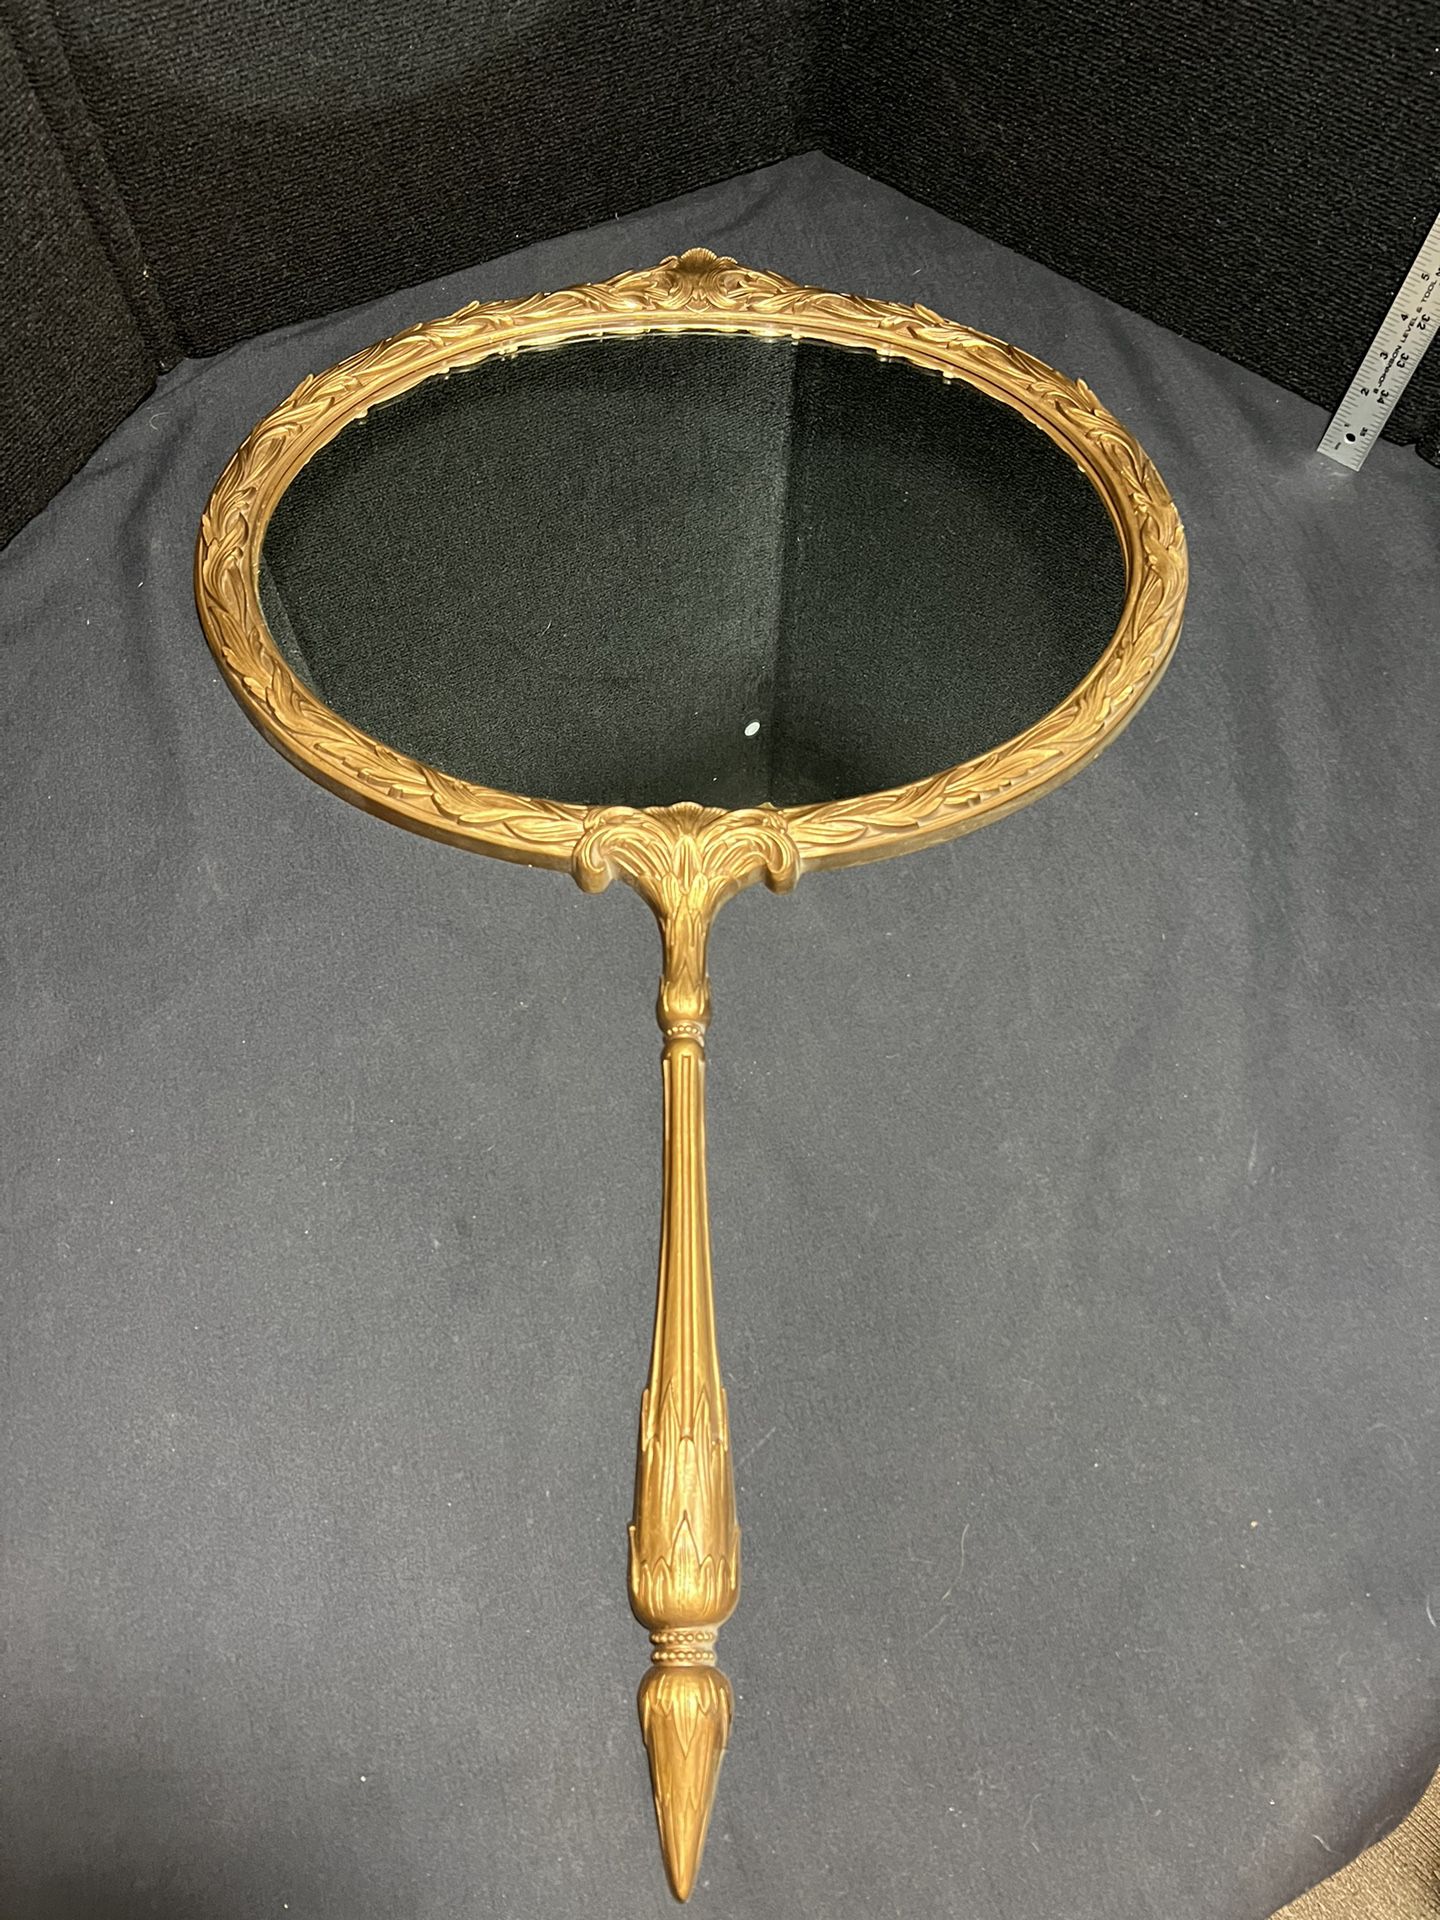 Vintage 1970s Burwood Wall Mirror Hand Mirror Shaped Gold Ornate 